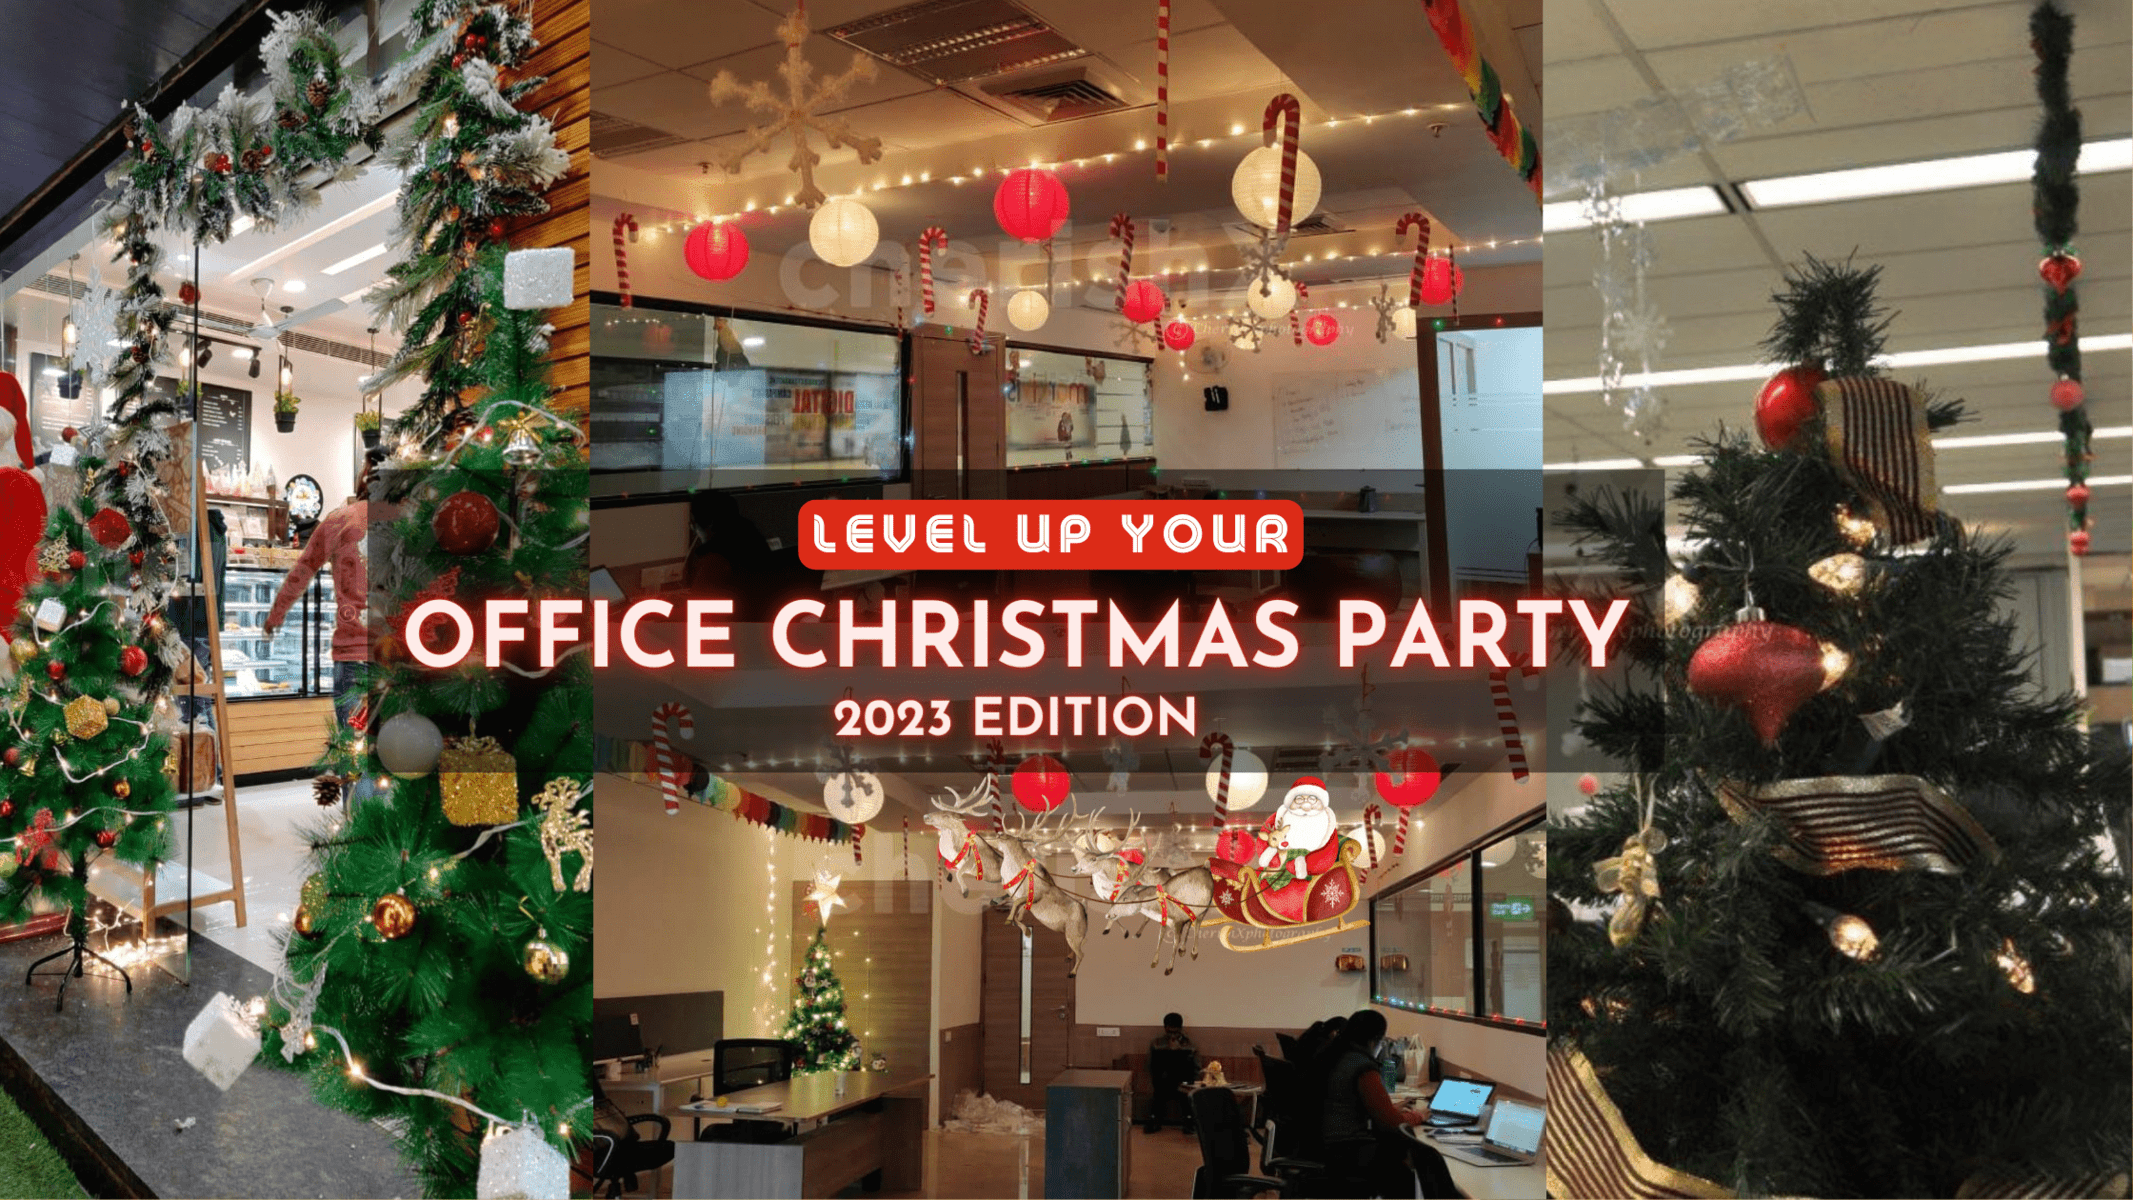 Level up your Office Christmas Party with Themed Decorations